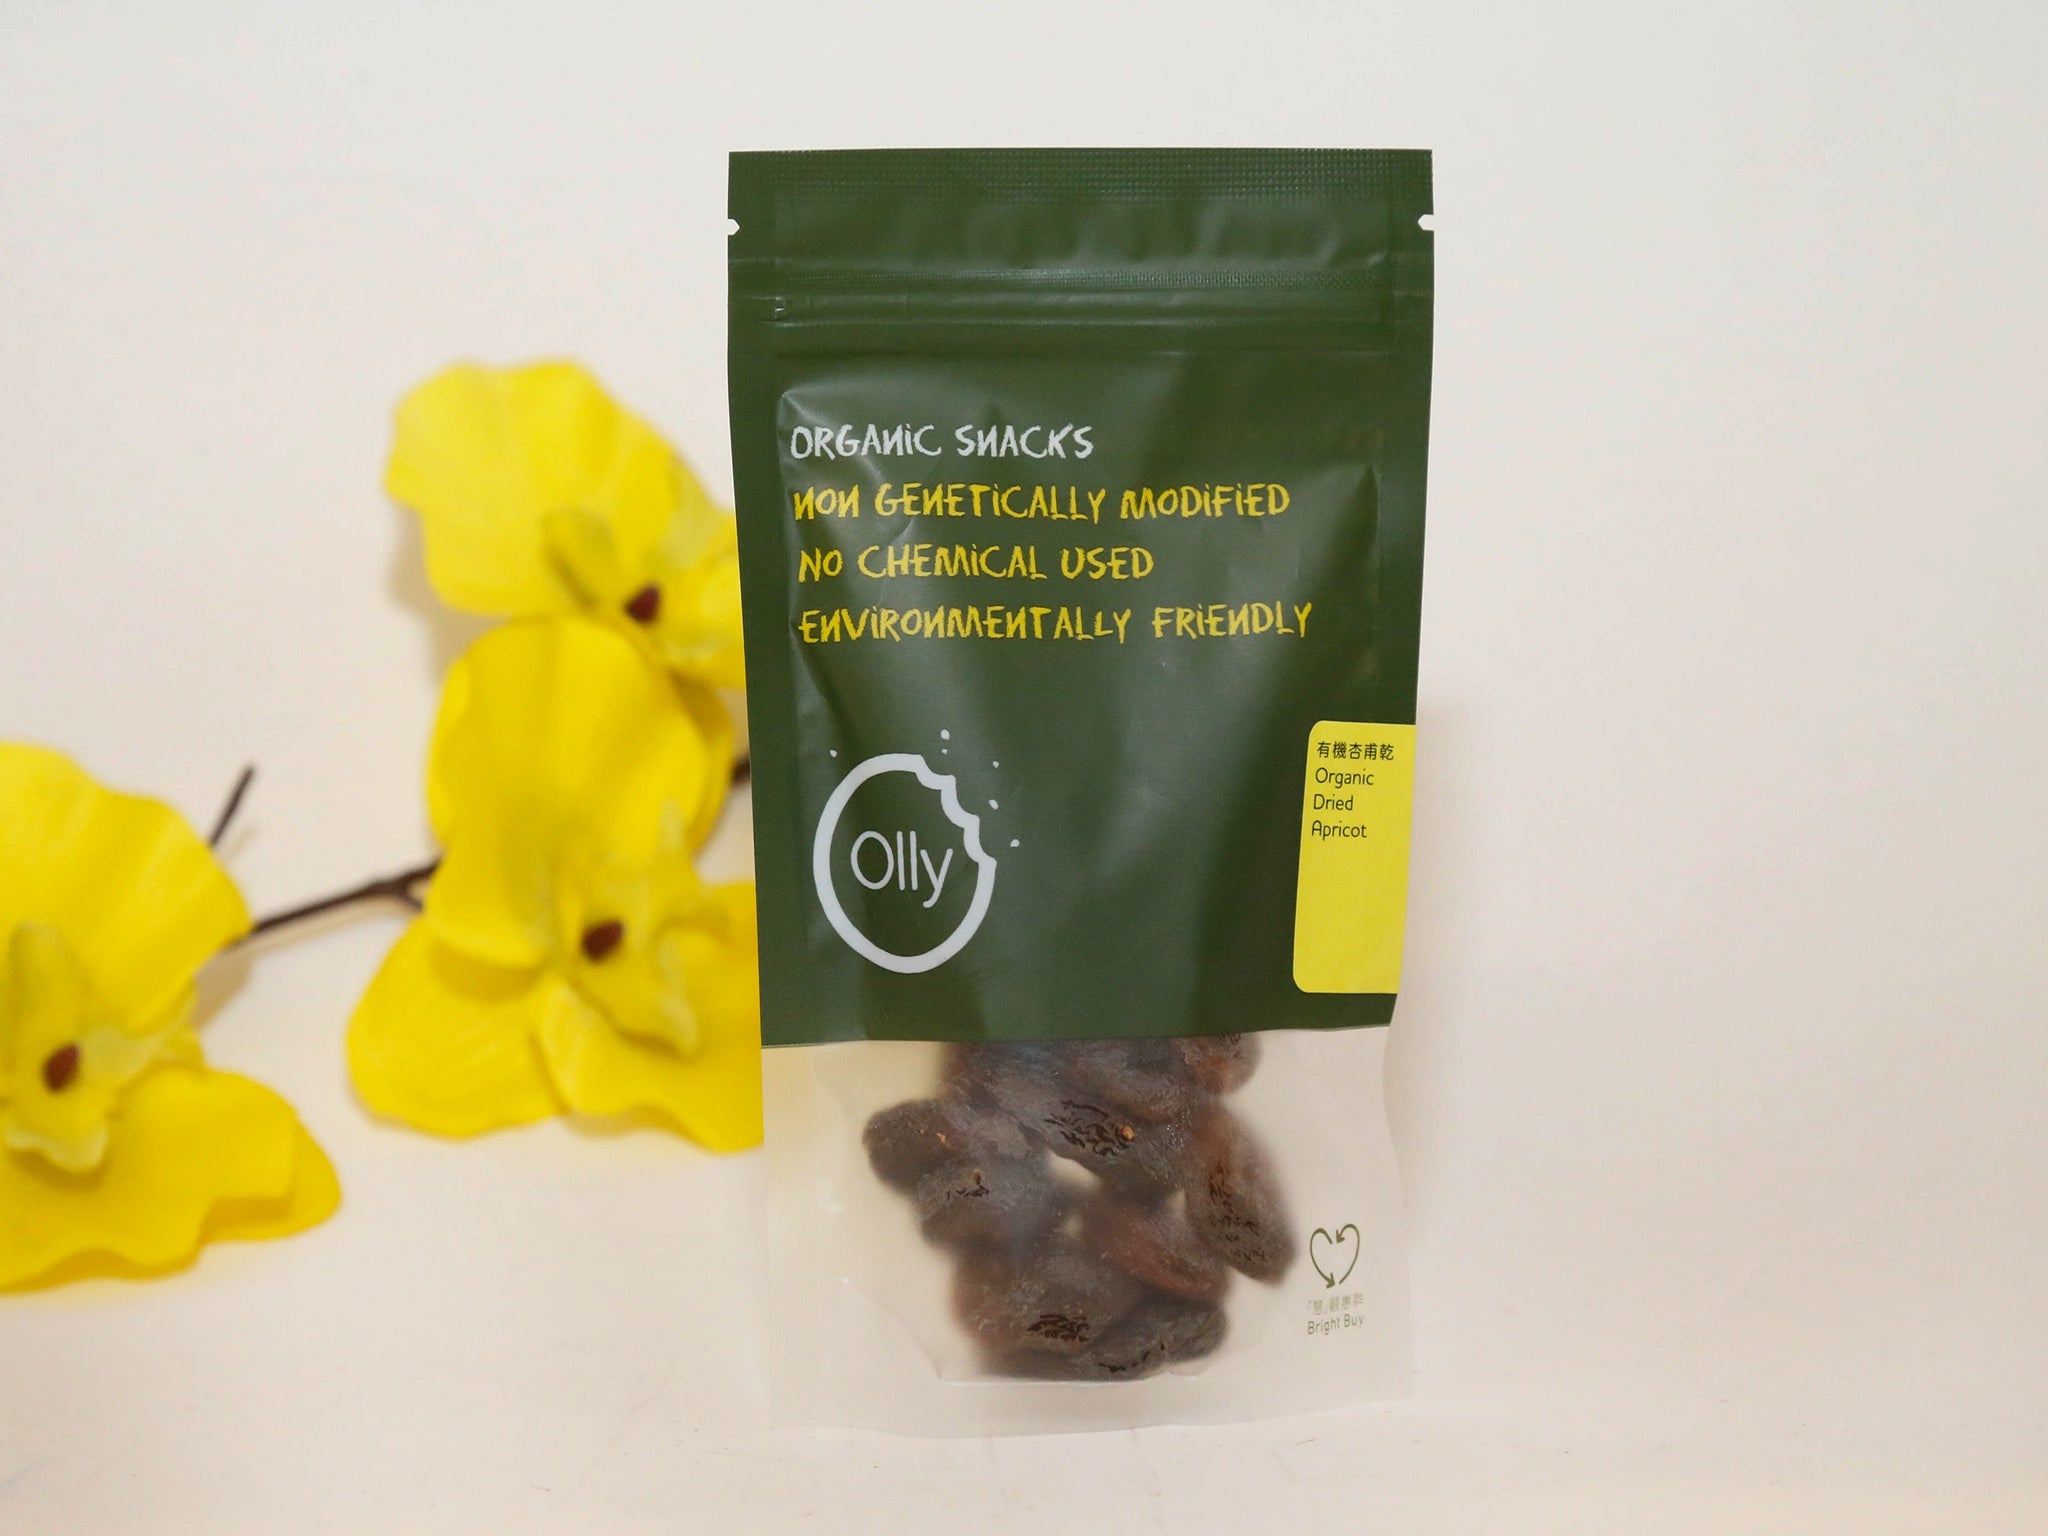 Olly Organic Dried Apricot 80g